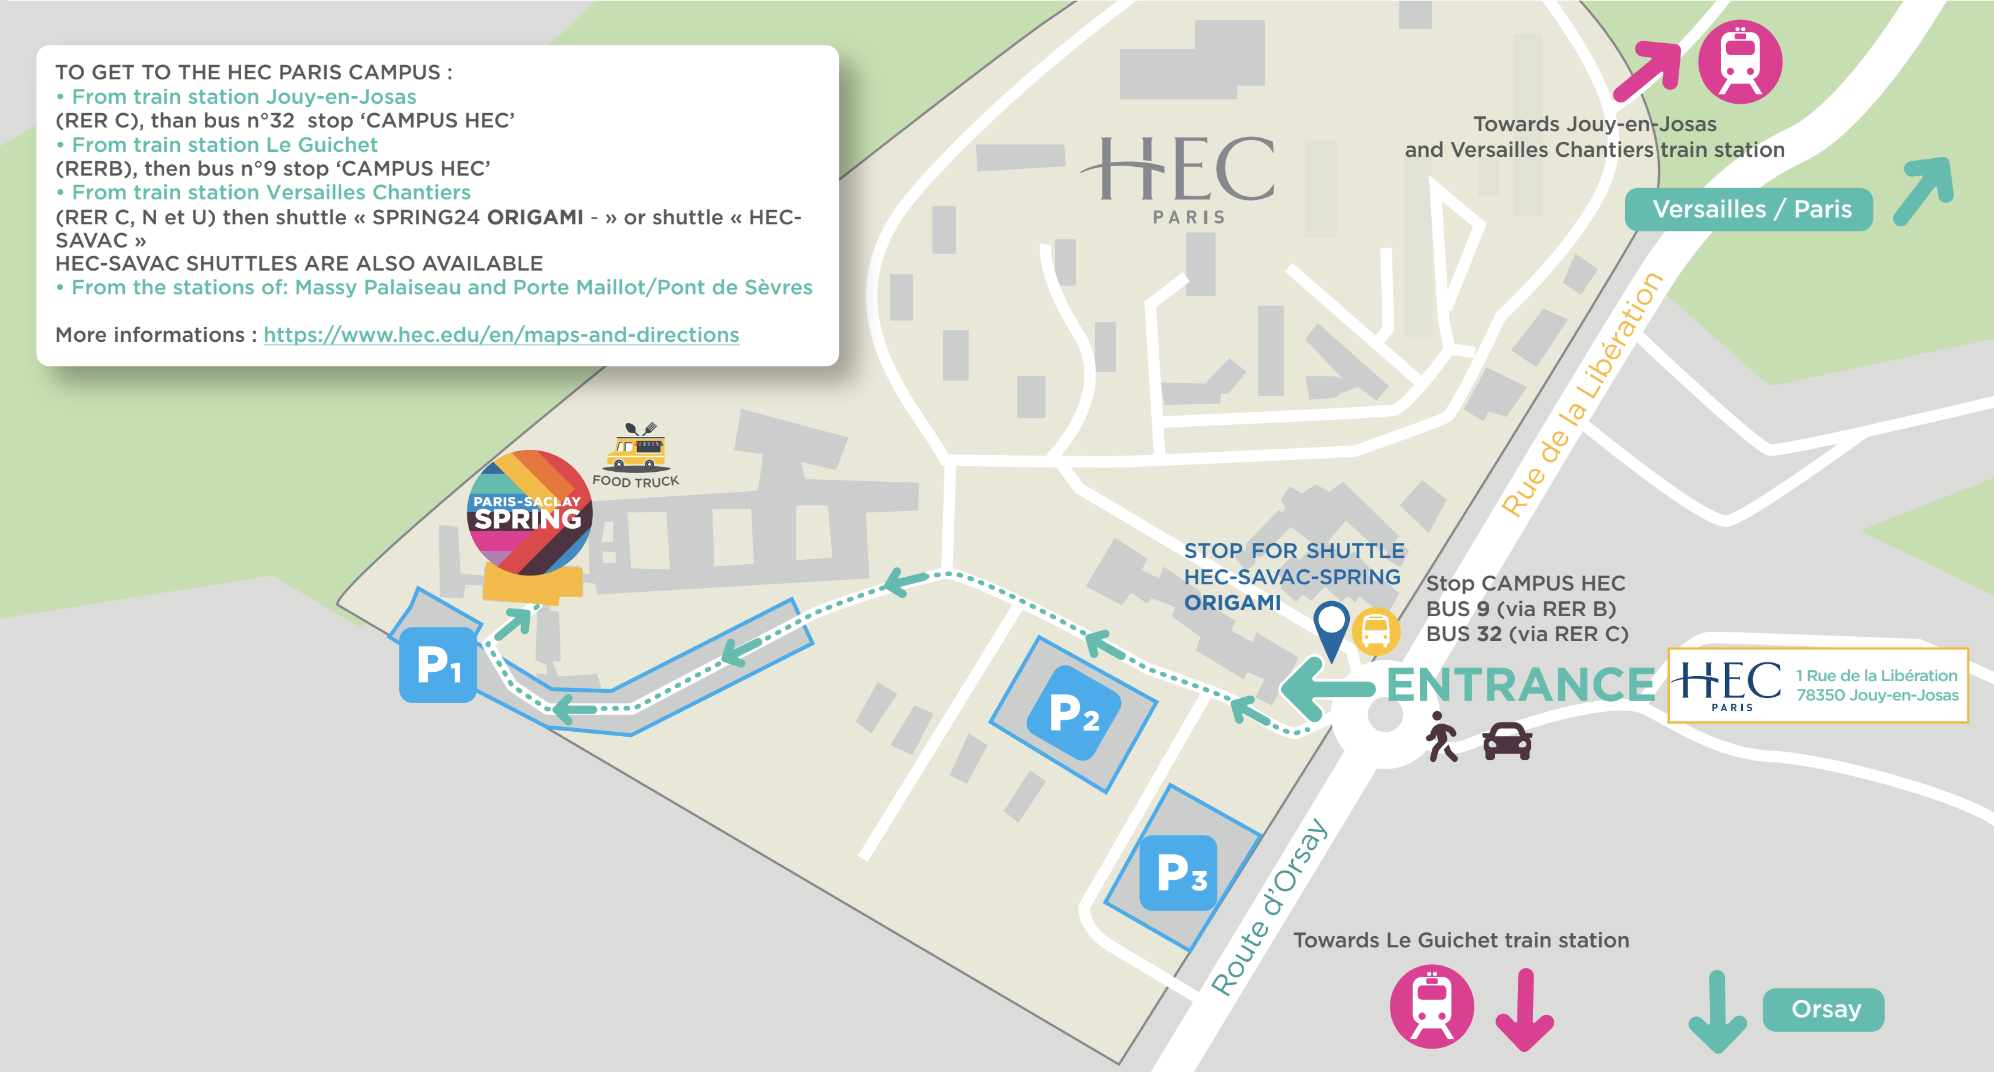 Access plan of the HEC Paris Demo Day and Paris Saclay SPRING event